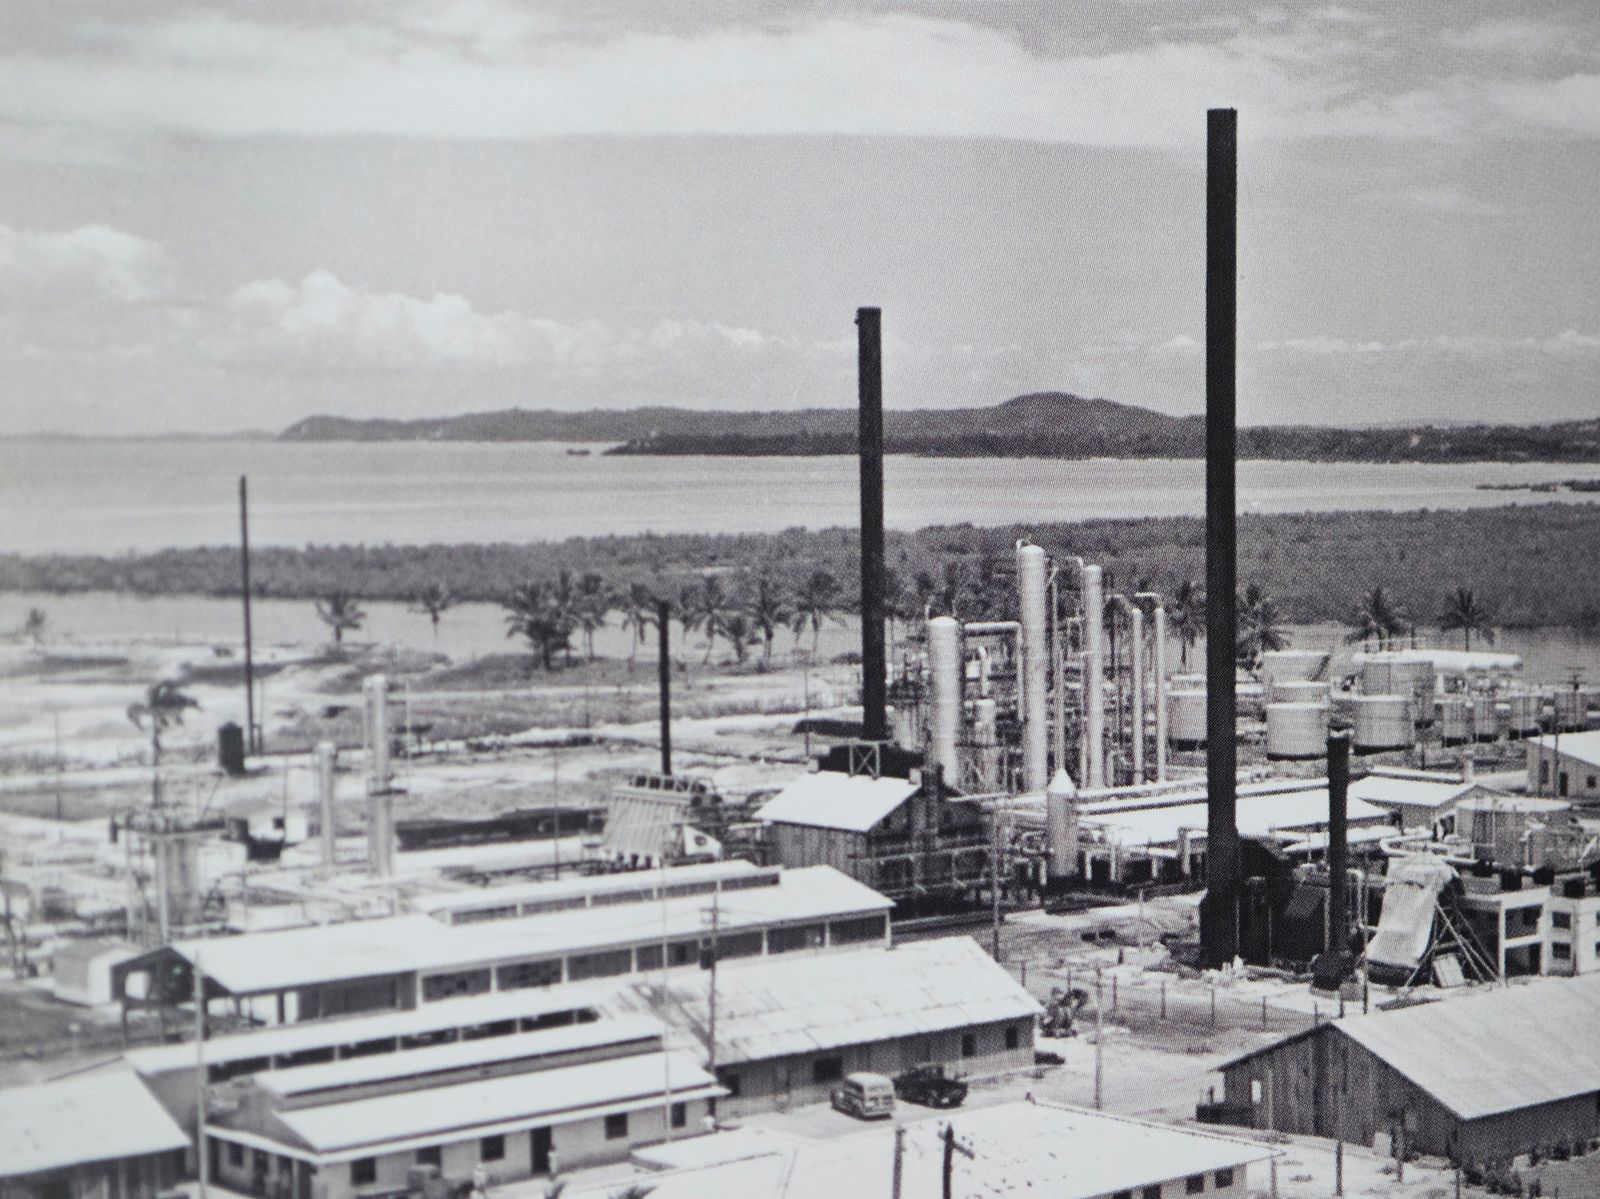 © Tommaso Rada - A detail of an archival image showing the Candeia Refinery at the beginning of its activity.